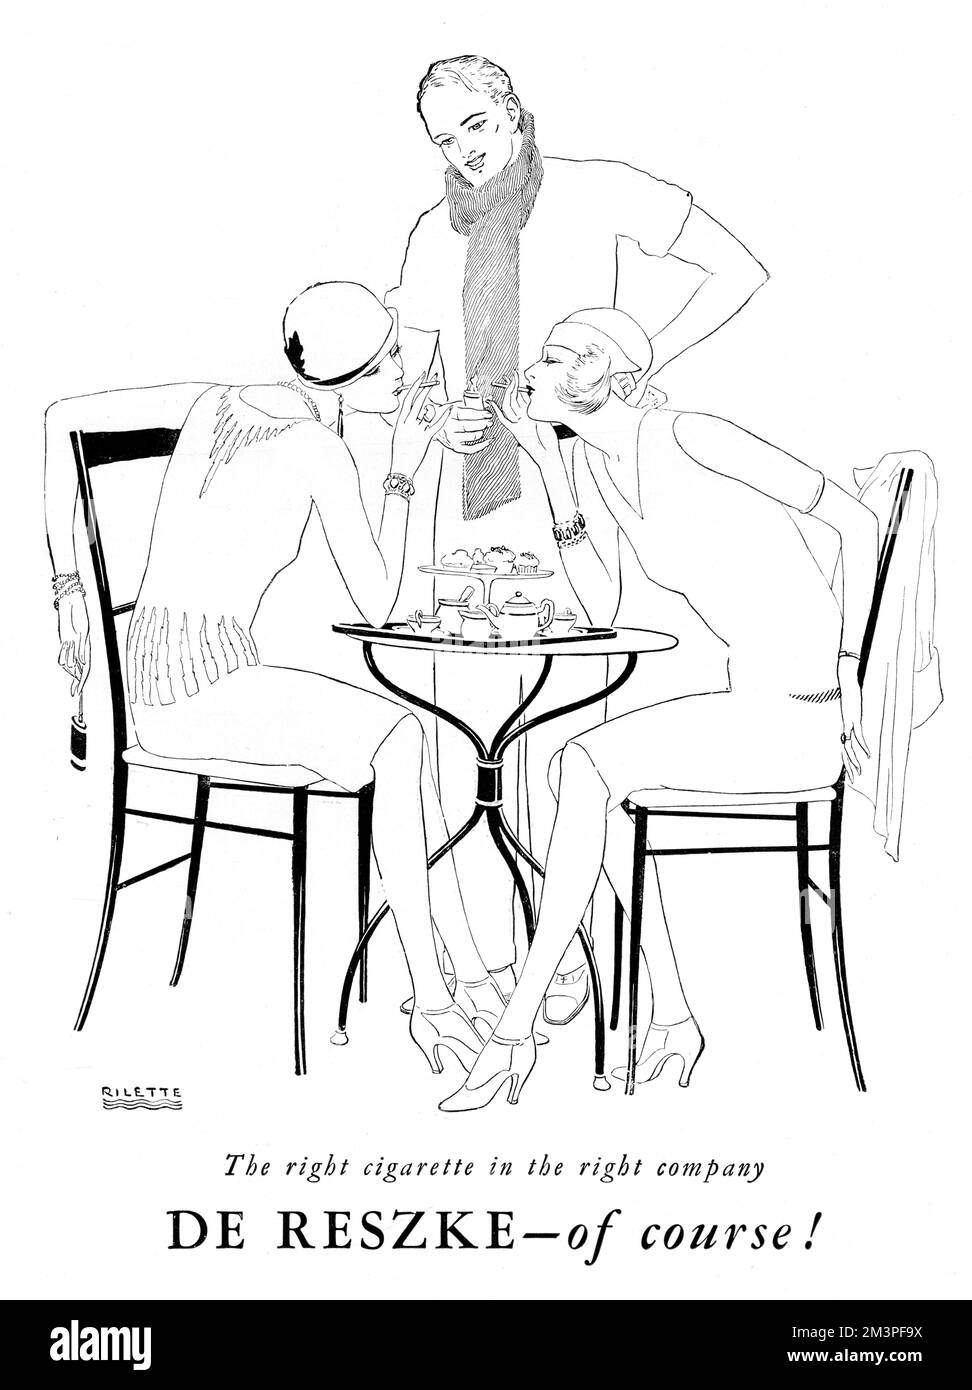 Advertisement drawn by Rilette showing a gentleman, quite possibly in rowing gear, offering to light the cigarettes of two stylish women seated in a caf&#x9ba0; As they both lean together to take the light, they create a elegant composition.       Date: 1928 Stock Photo